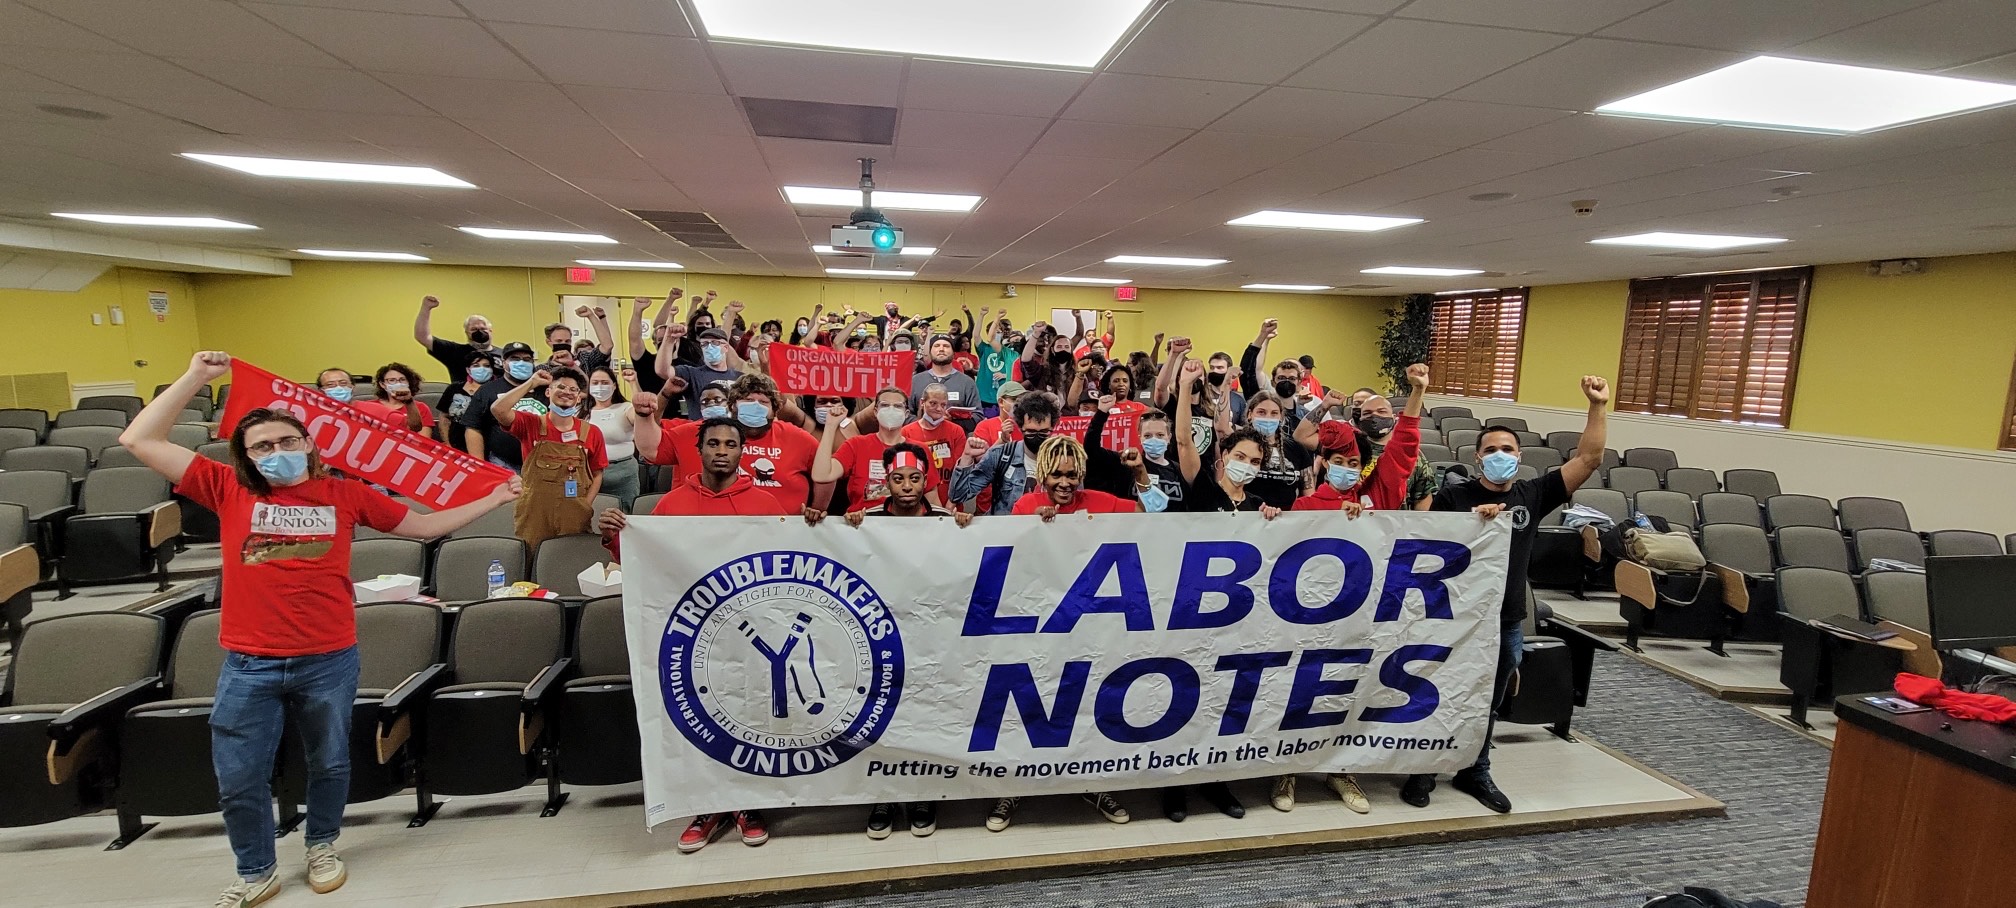 Photo from Alabama Troublemakers School 2022 shows a crowd of people in an auditorium grouped behind a Labor Notes banner, fists raised.